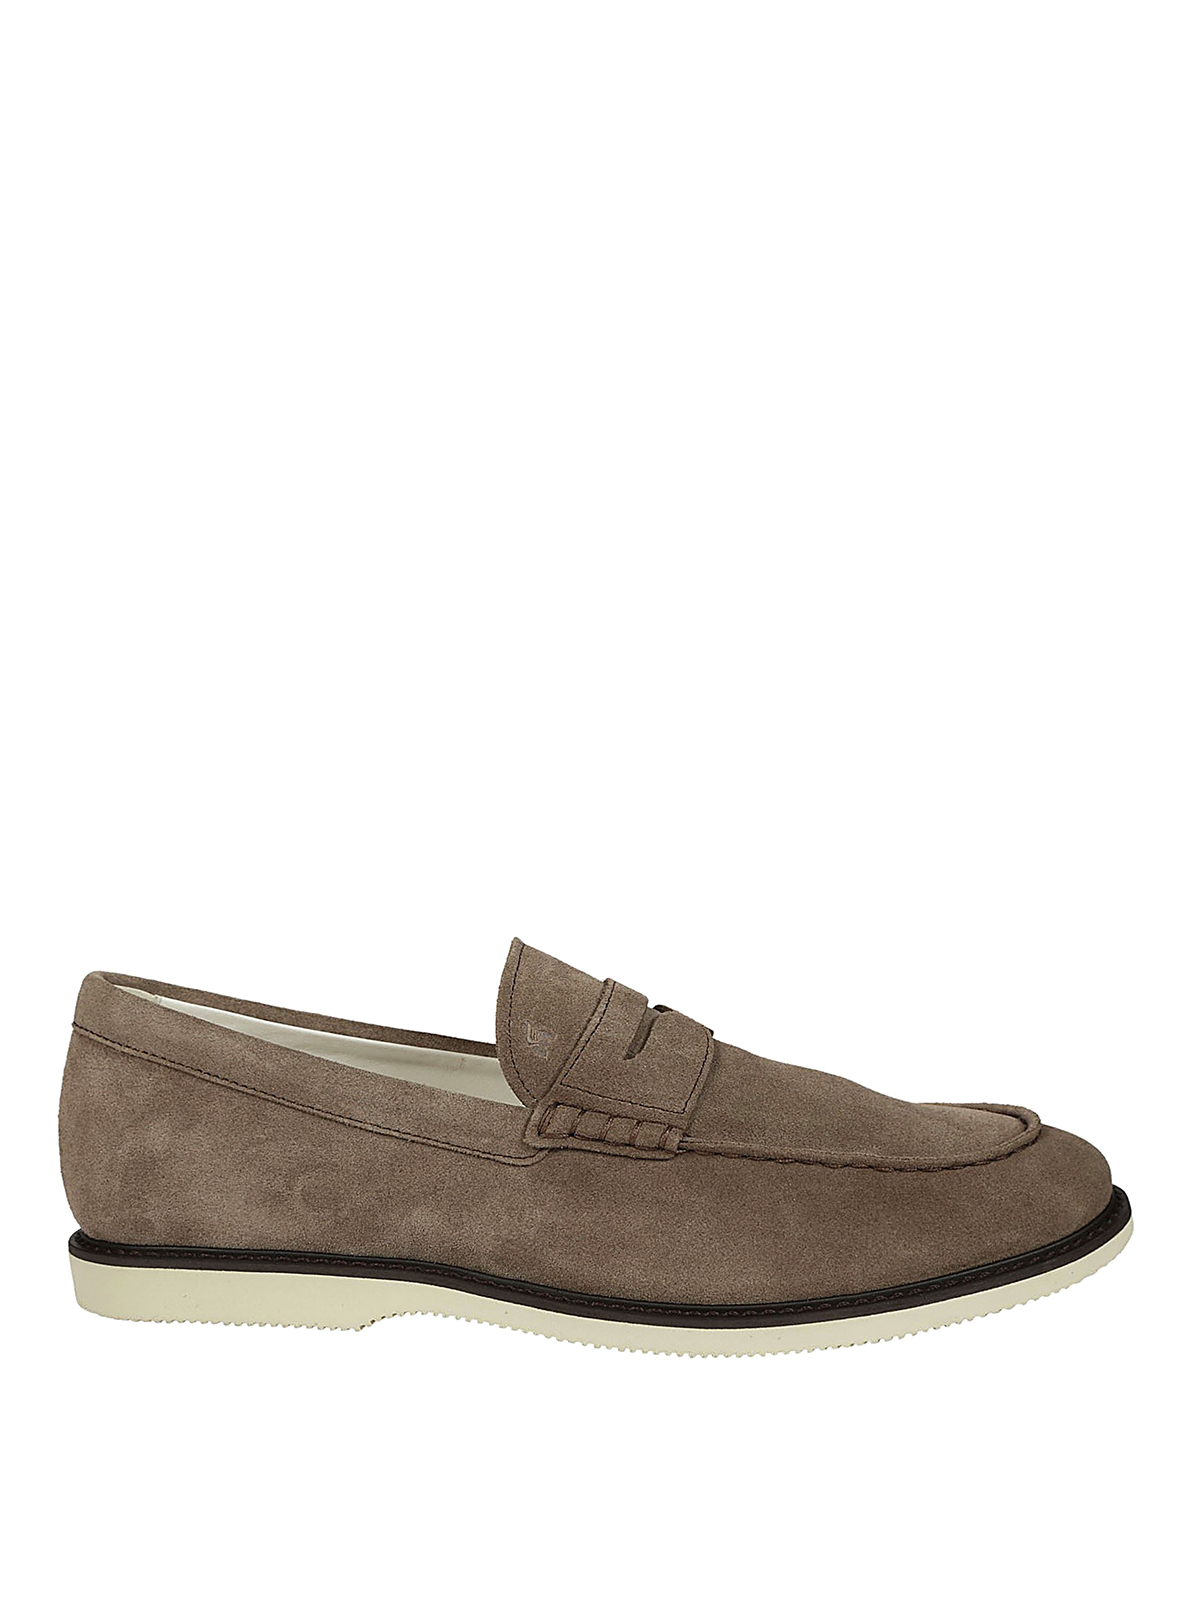 Loafers & Slippers Hogan - Light brown suede loafers - HXM3120R732HG0S413